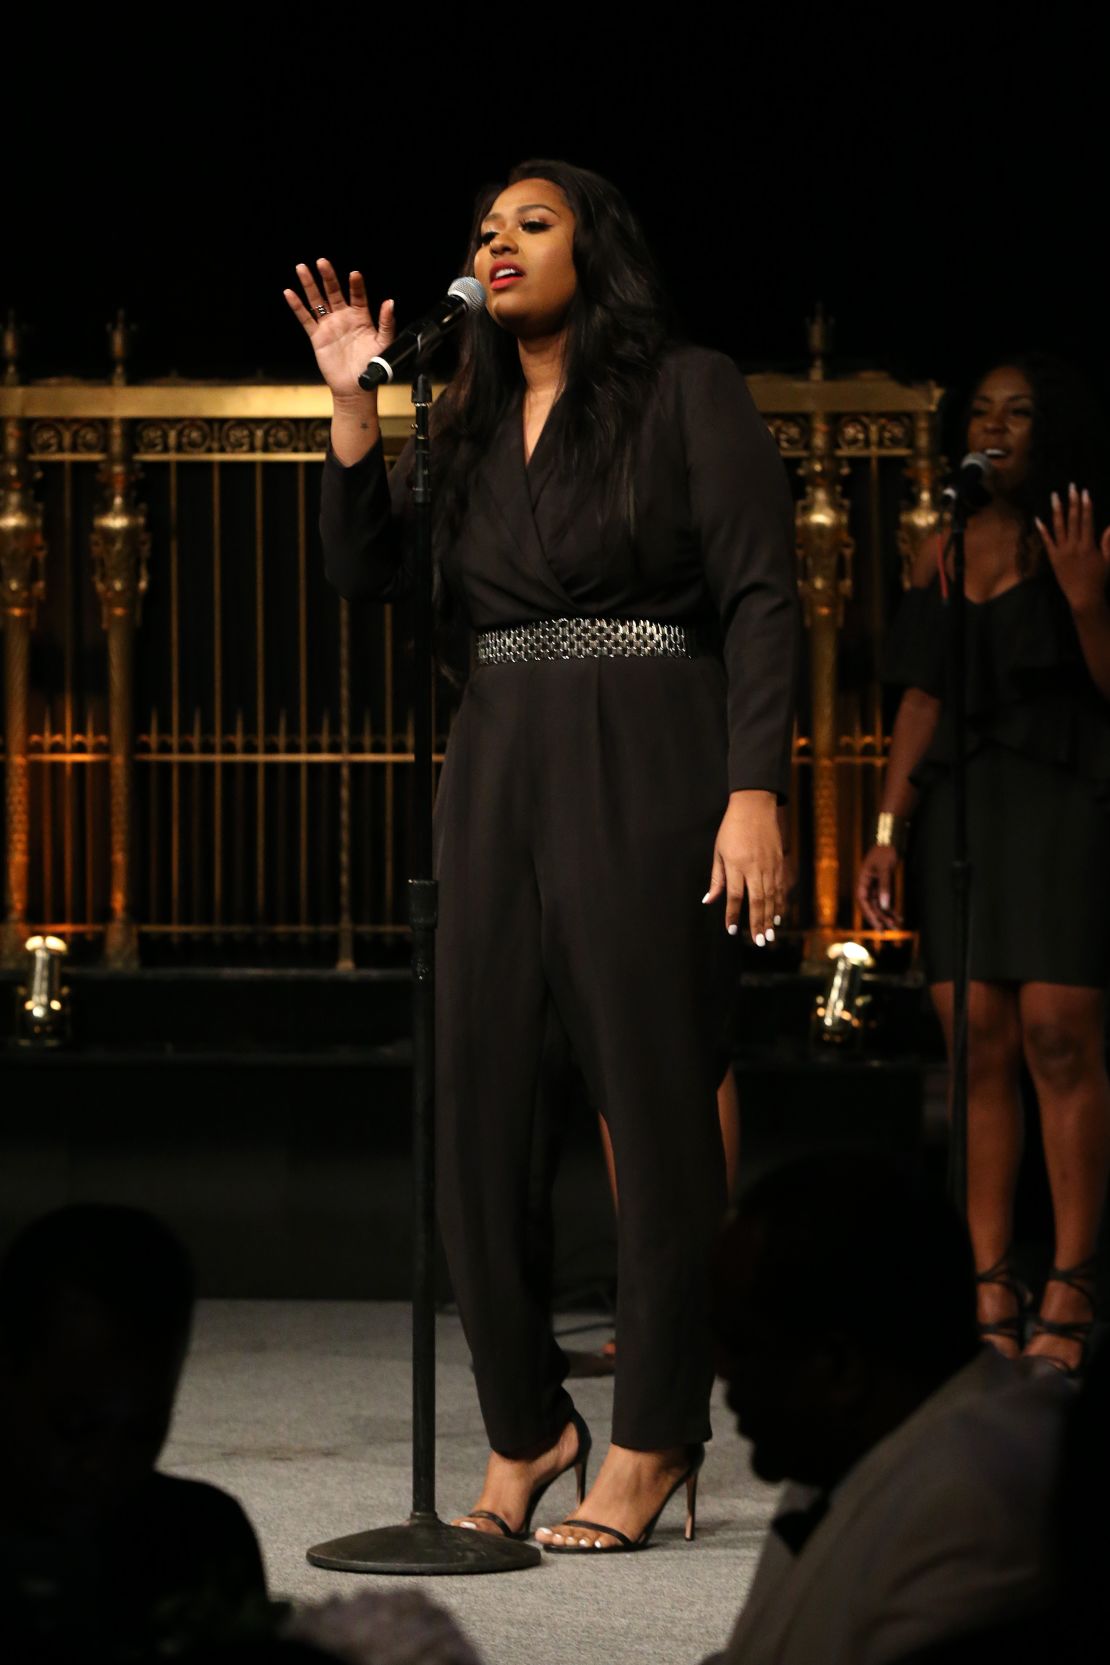 Jazmine Sullivan sings onstage during the Whitaker Peace & Development Initiative "Place for Peace" gala at New York's Gotham Hall on September 27, 2019.